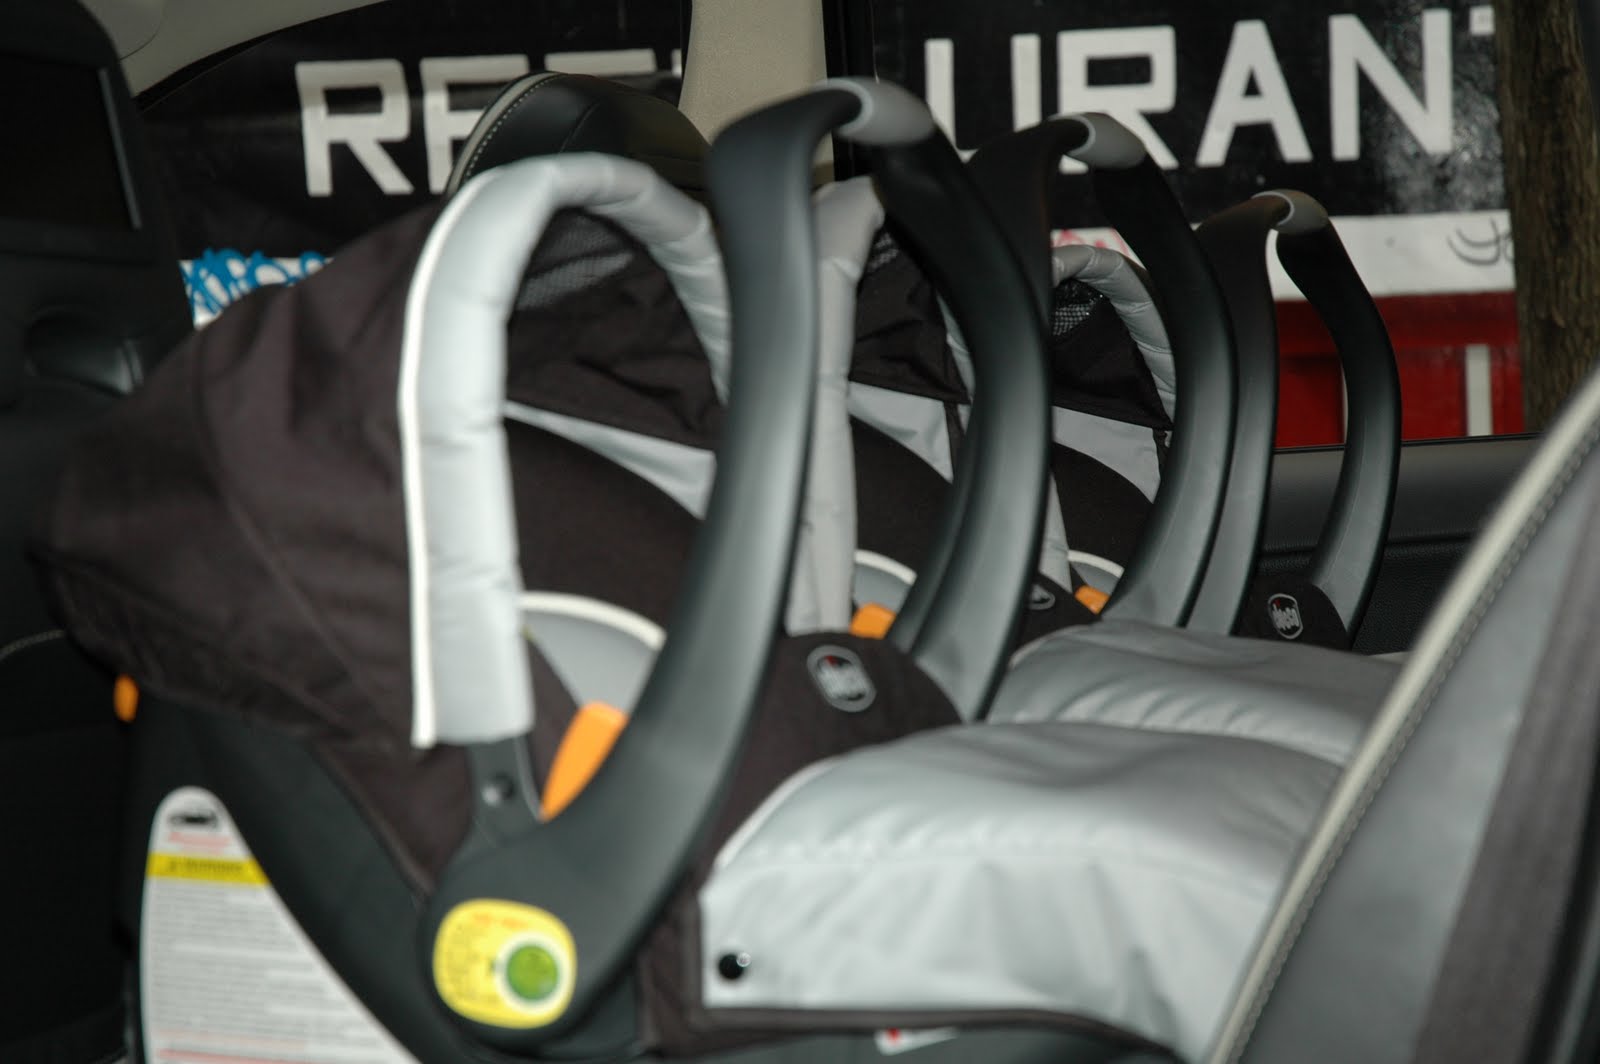 Where to Place the Second Car Seat? A Simple Question that Stumped a Dad  and Doctor - ChildrensMD